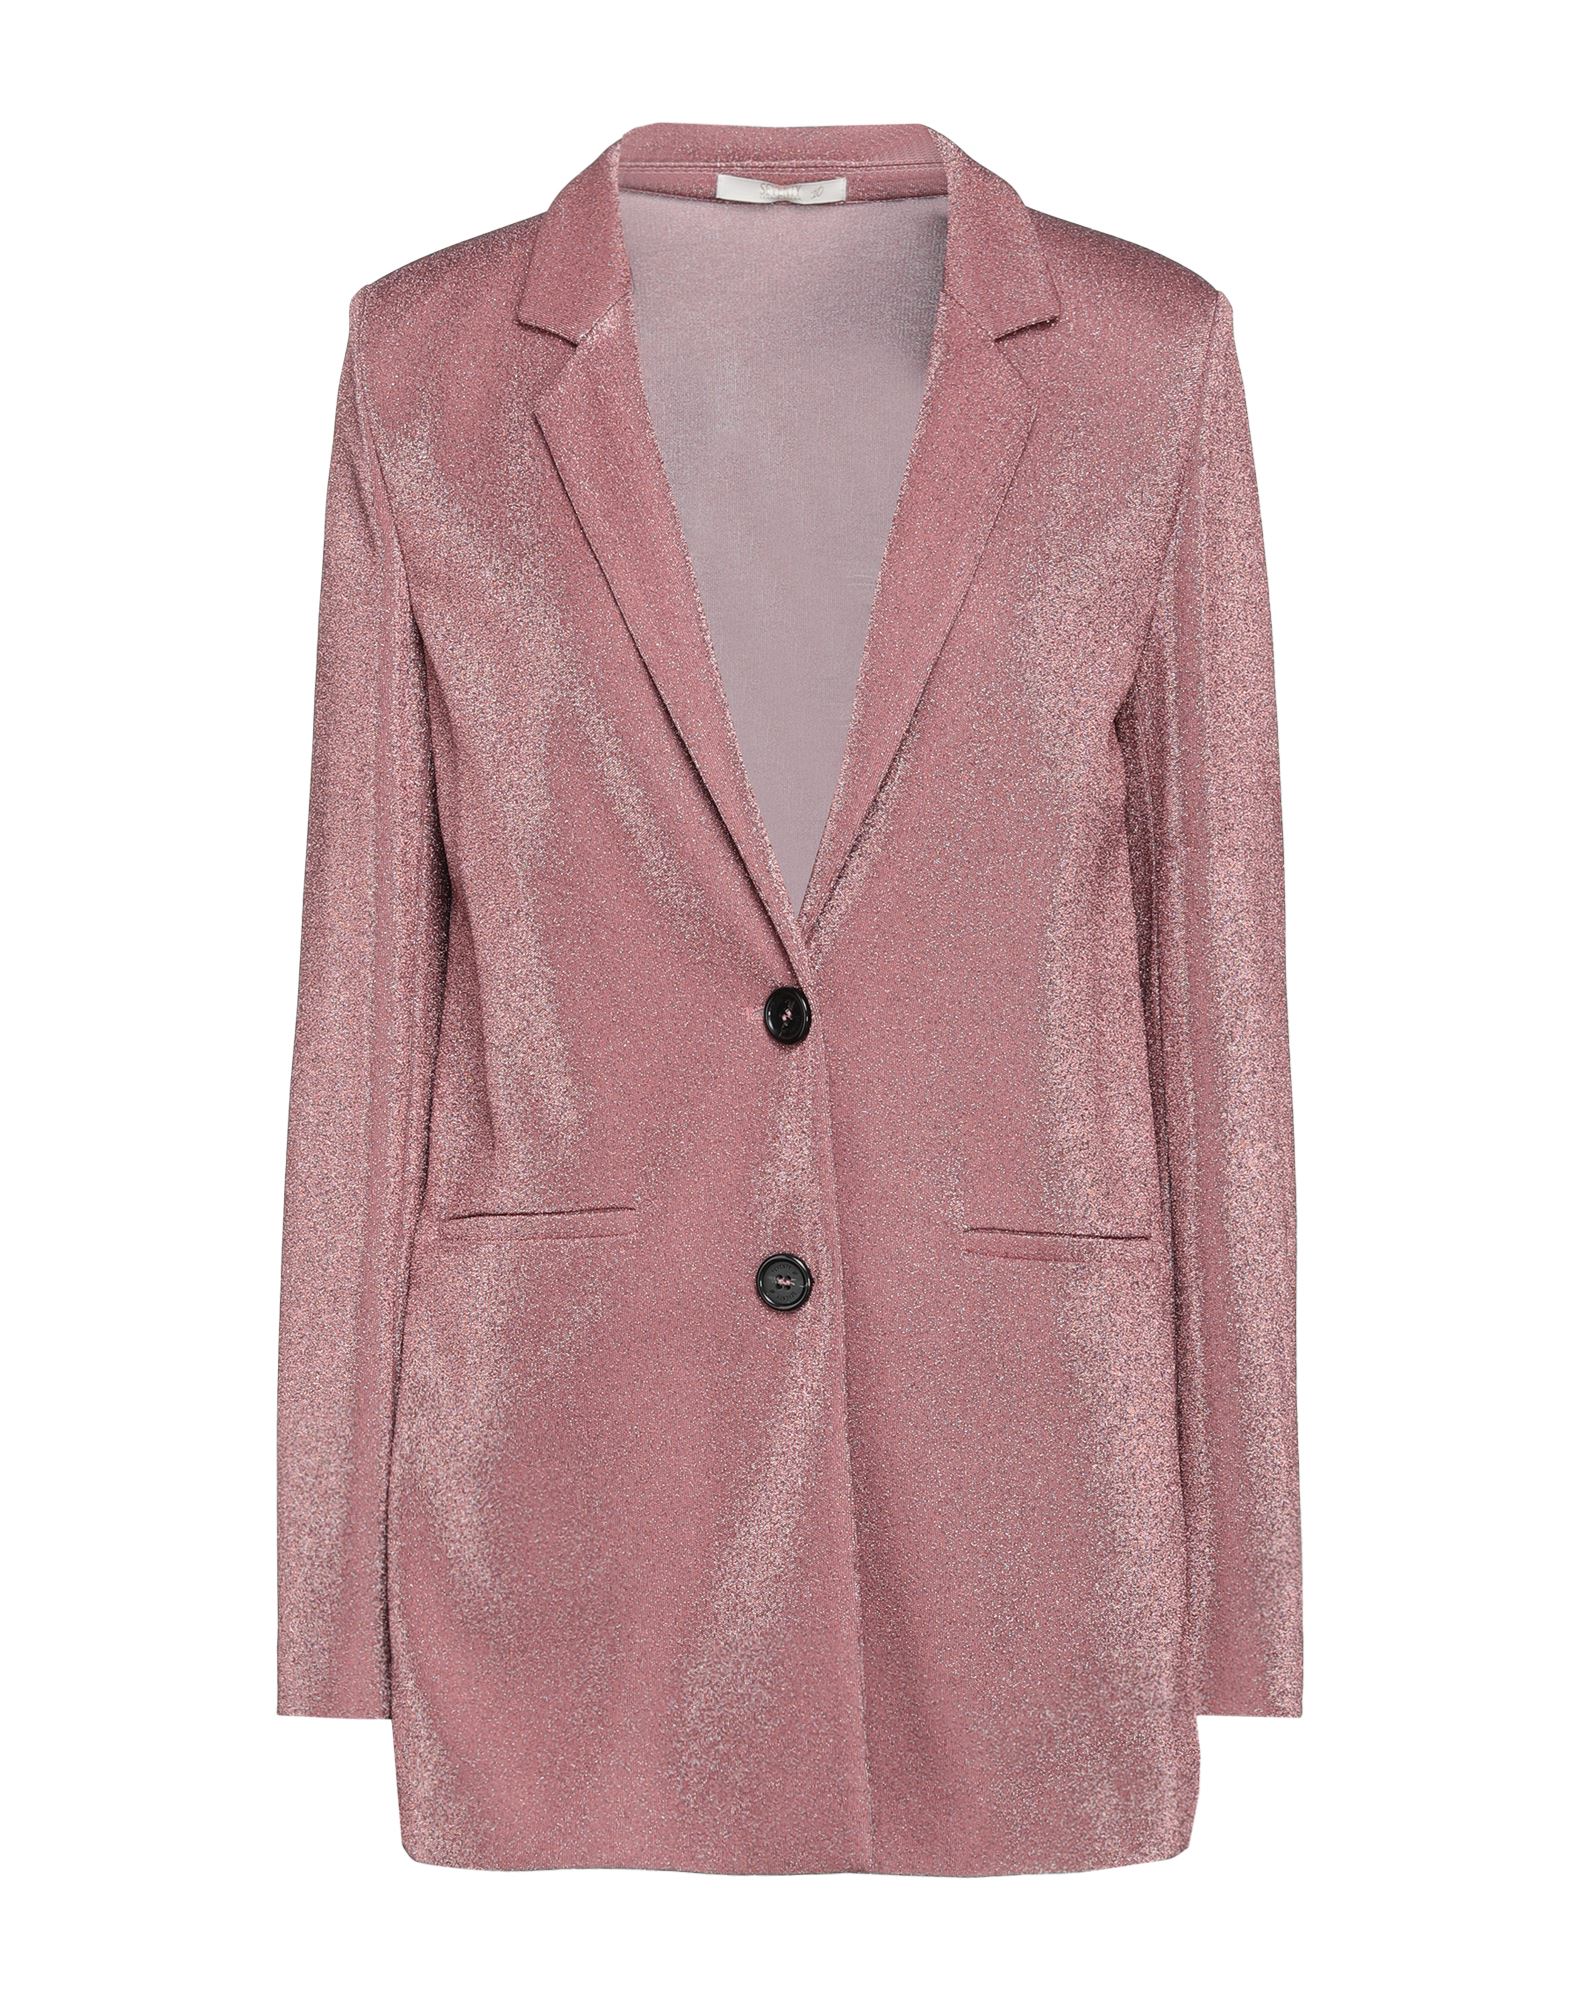 Seventy Sergio Tegon Suit Jackets In Pastel Pink